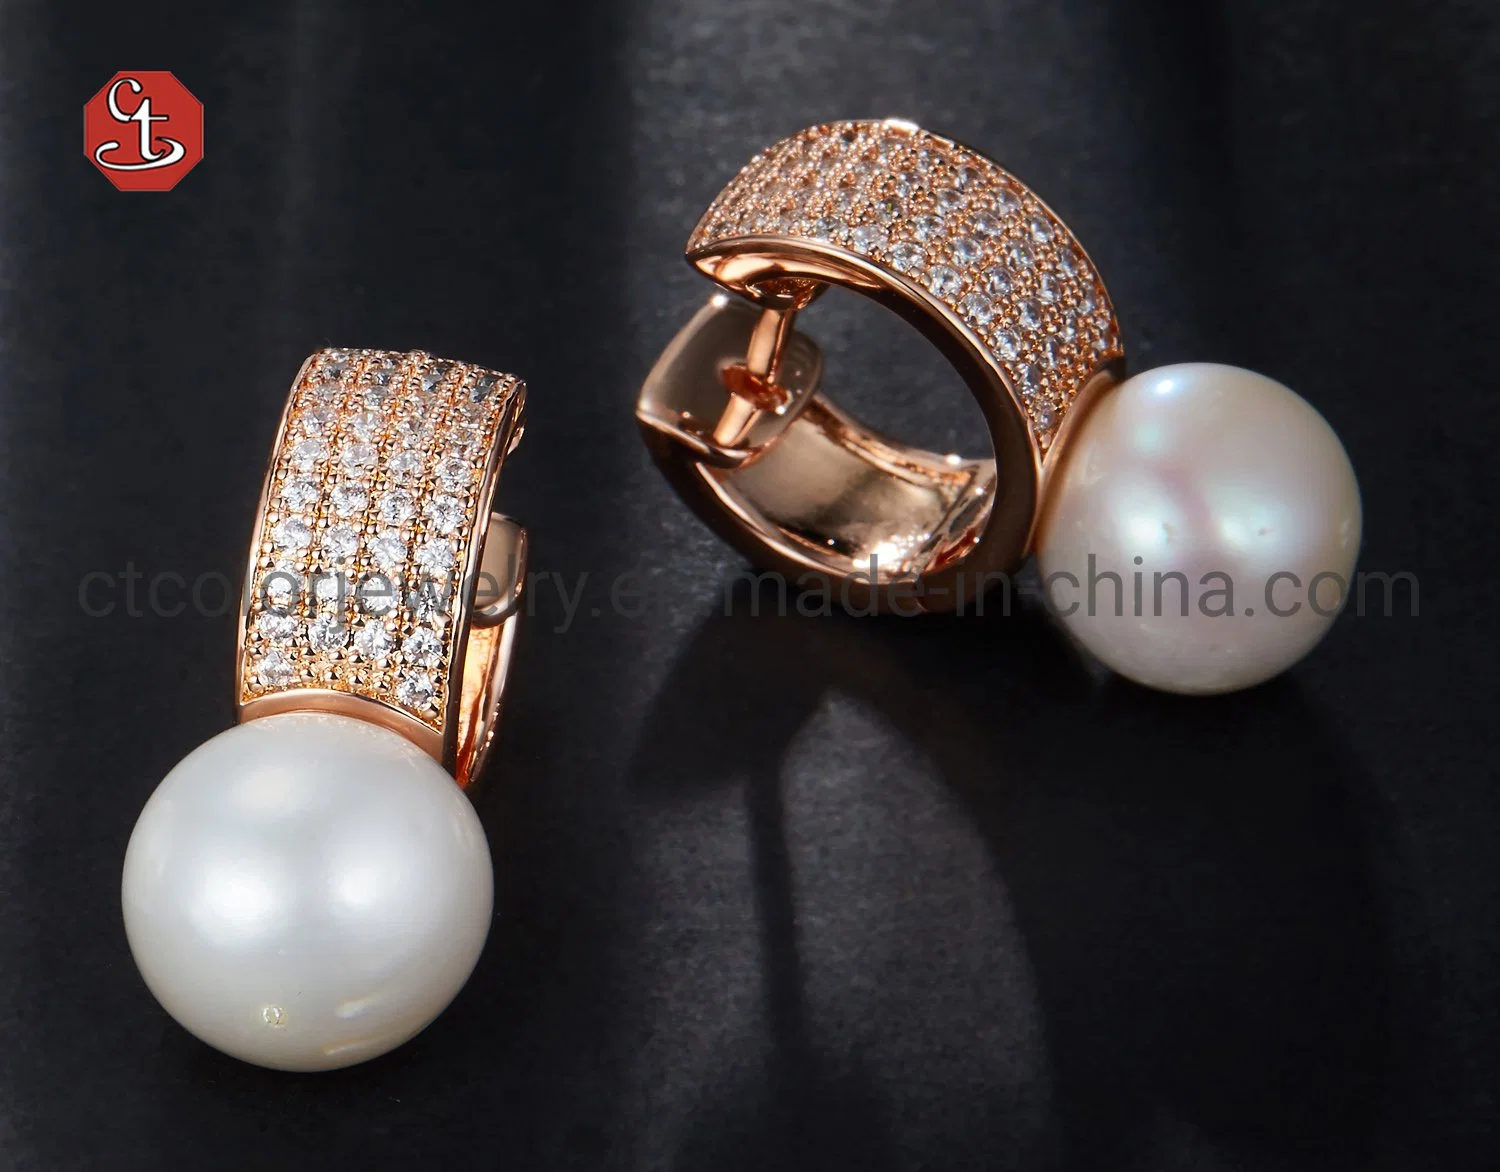 Women Wedding Accessories, White Shell Pearl Earrings Jewelry with cz